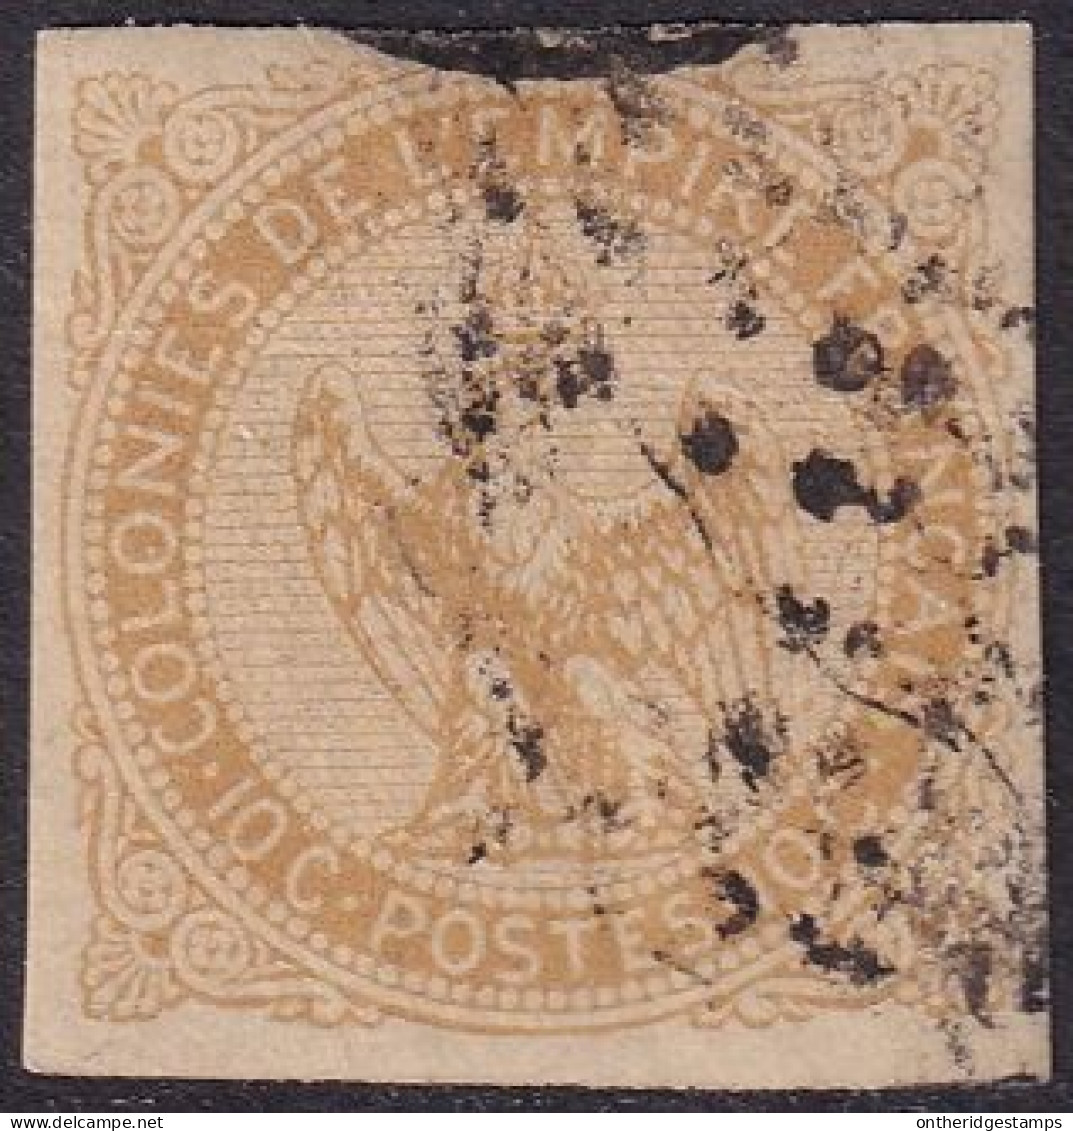 French Colonies 1859 Sc 3 Yt 3 Used Lozenge Cancel Paper Adhesion - Eagle And Crown